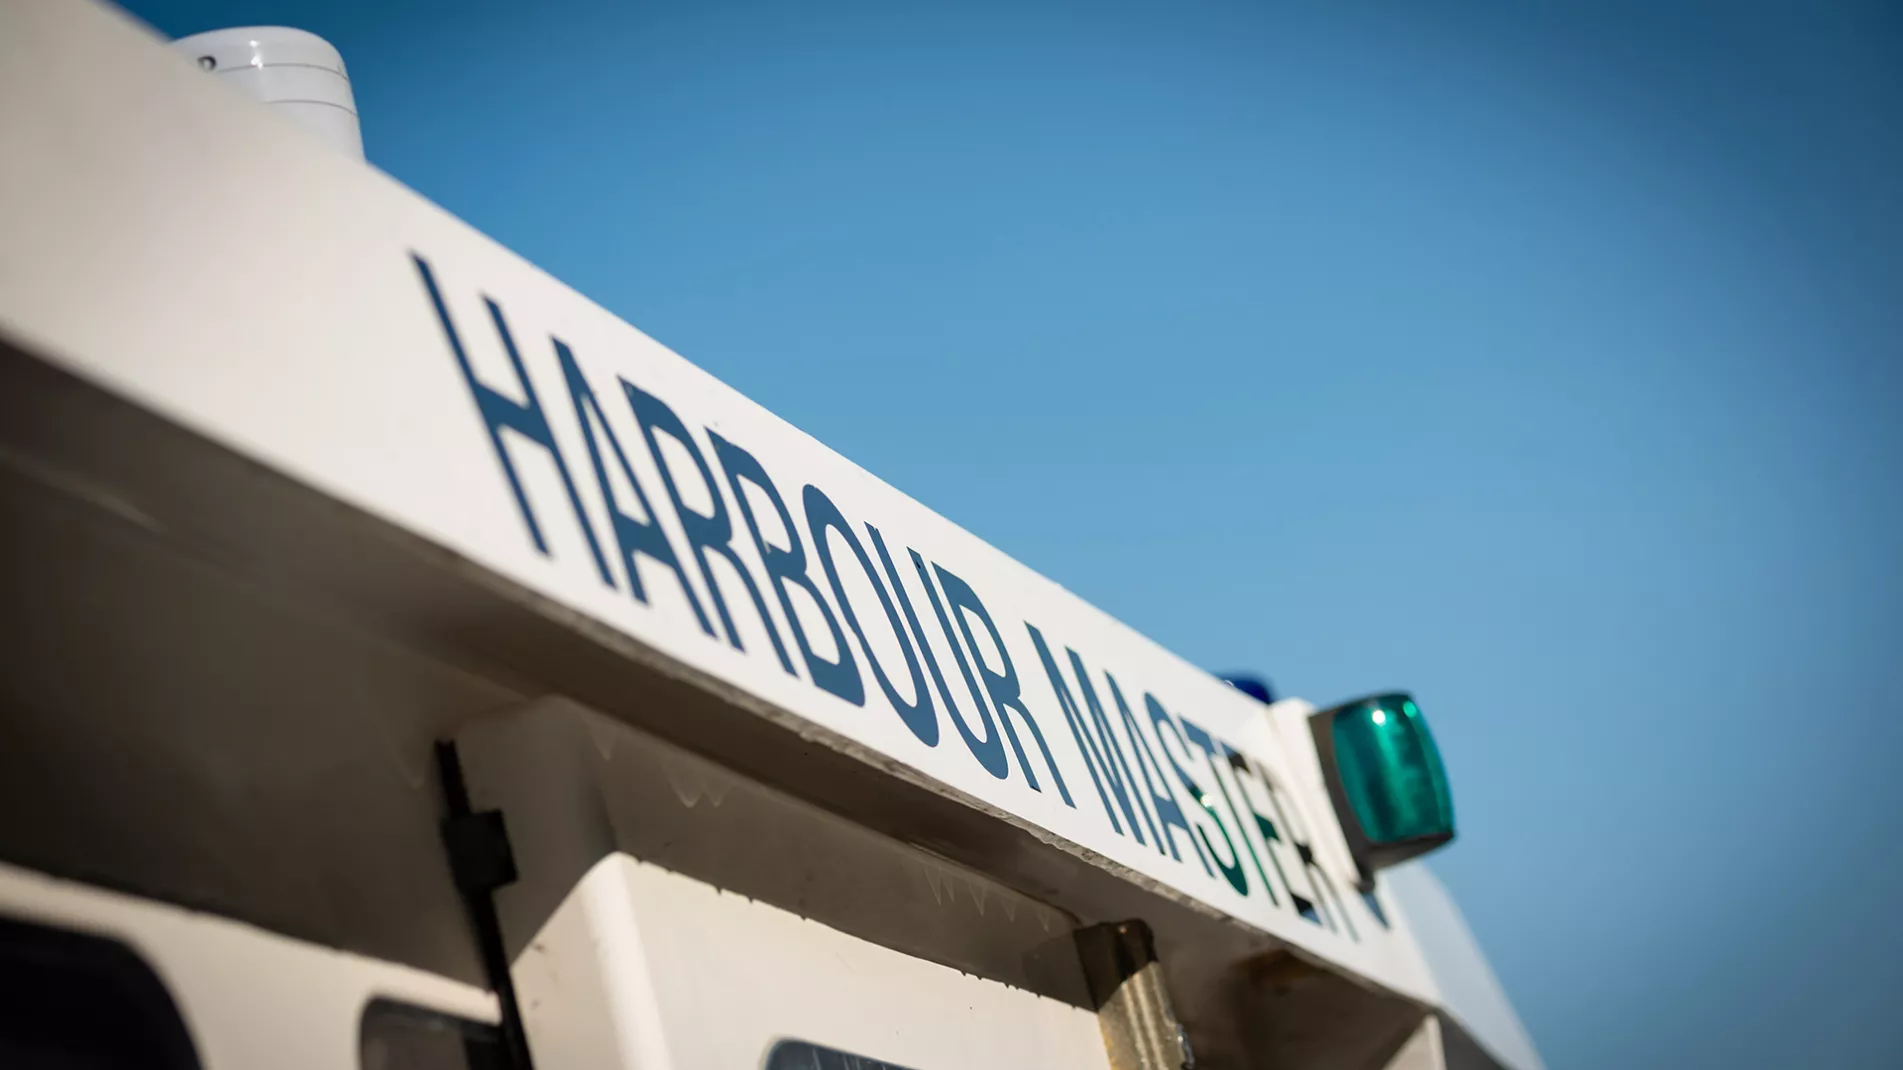 A harbour master sign on the side of a boat